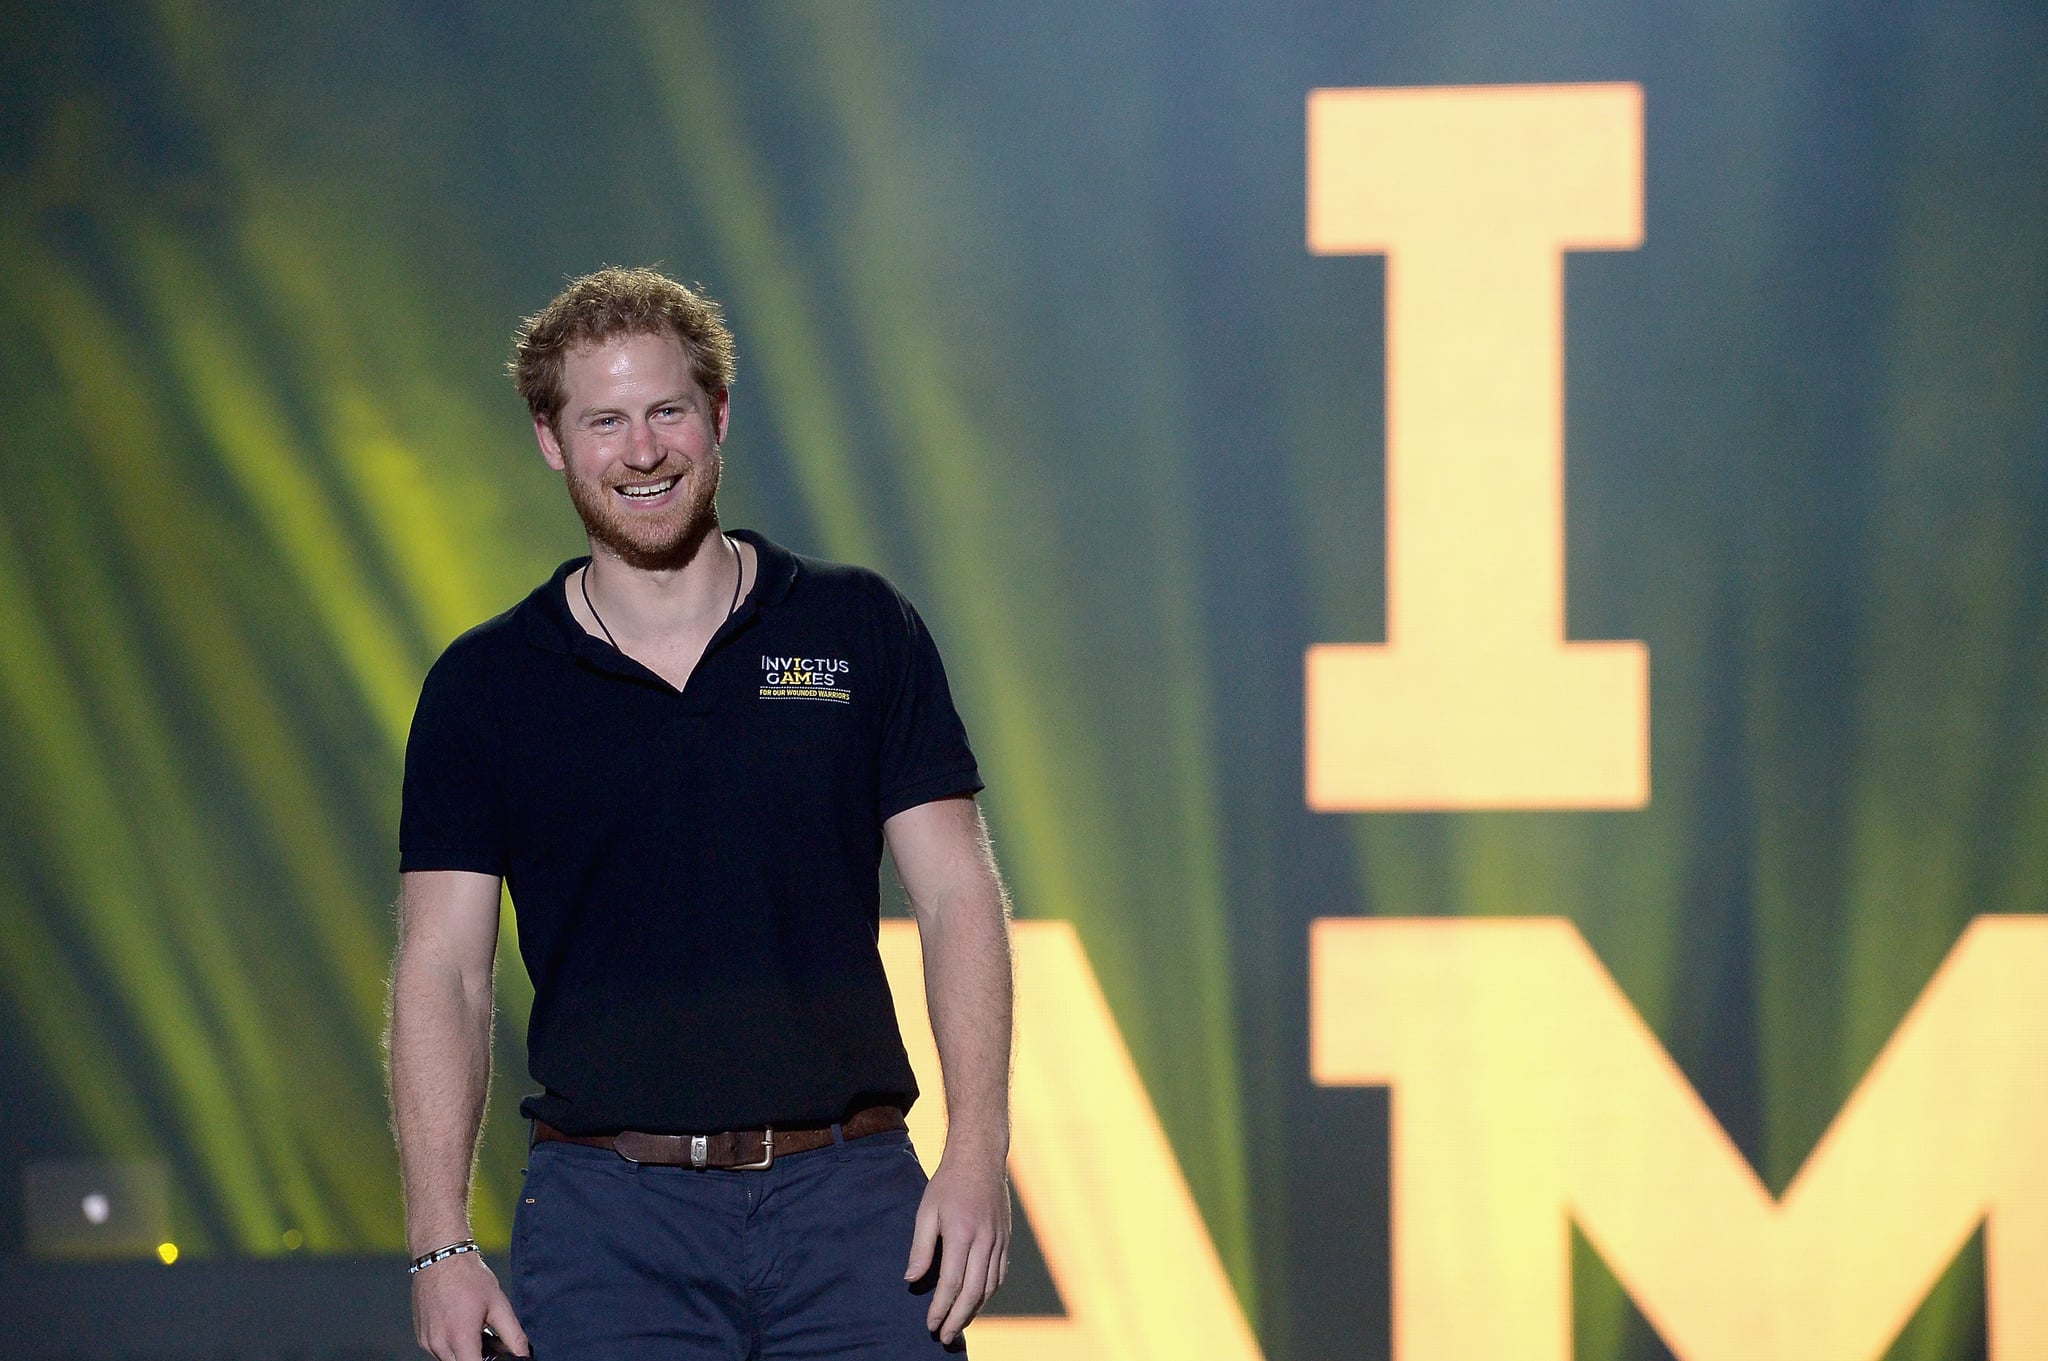 LAKE BUENA VISTA, FL - MAY 12:  Prince Harry closing remarks during the Invictus Games Orlando 2016 - Closing Ceremony at ESPN Wide World of Sports Complex on May 12, 2016 in Lake Buena Vista, Florida.  (Photo by Gustavo Caballero/Getty Images for Invictus Games)